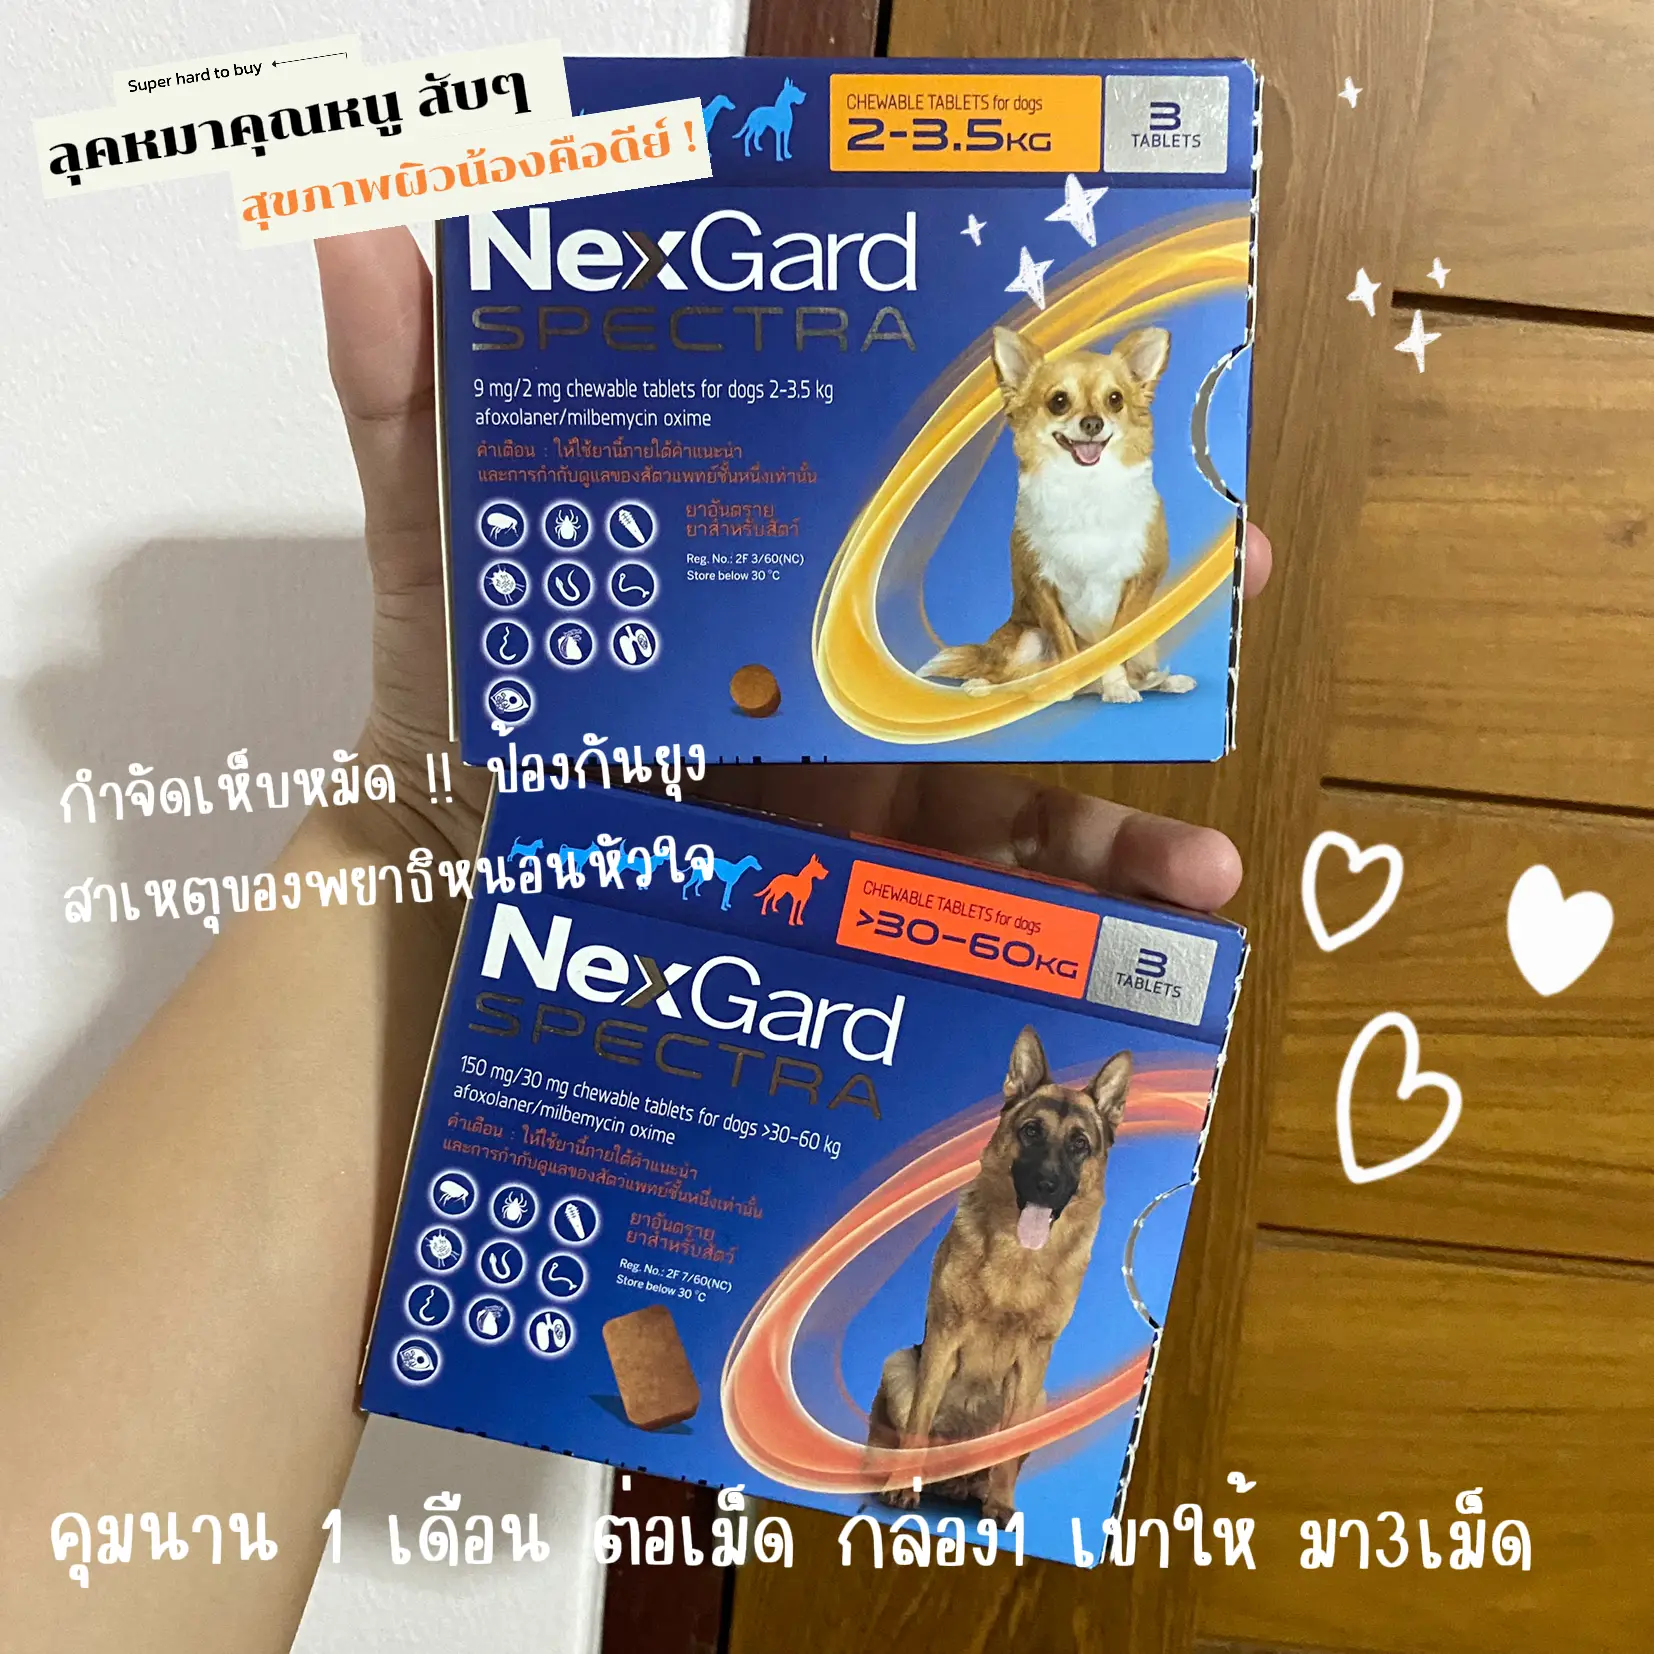 Nexgard spectra 🐶🐶 flea tick remover without leprosy heartworm